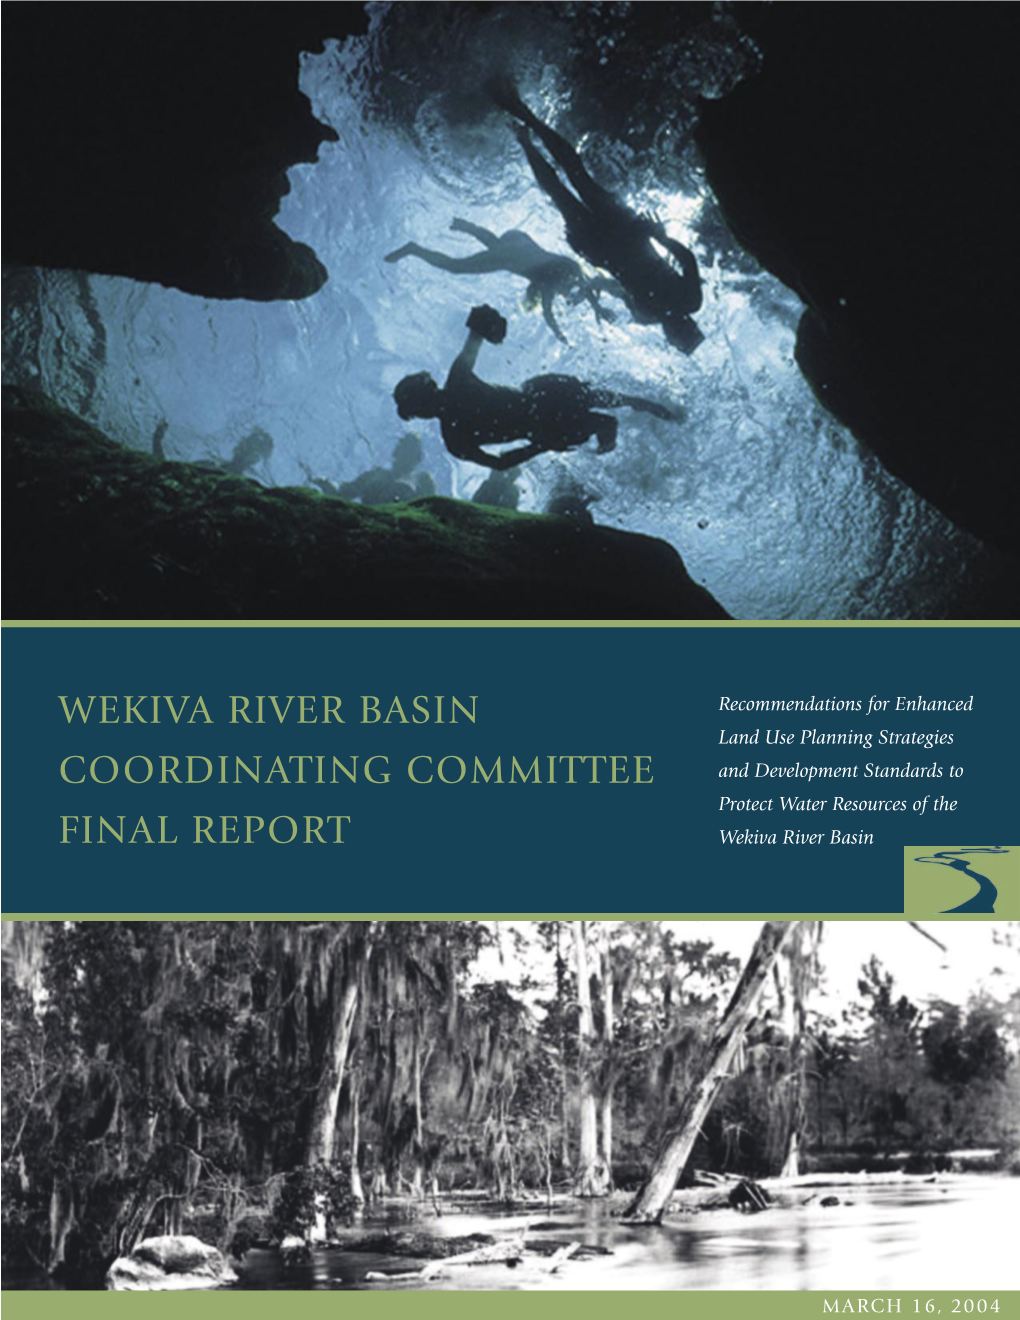 The Wekiva River Basin Coordinating Committee by Executive Order 2003-112